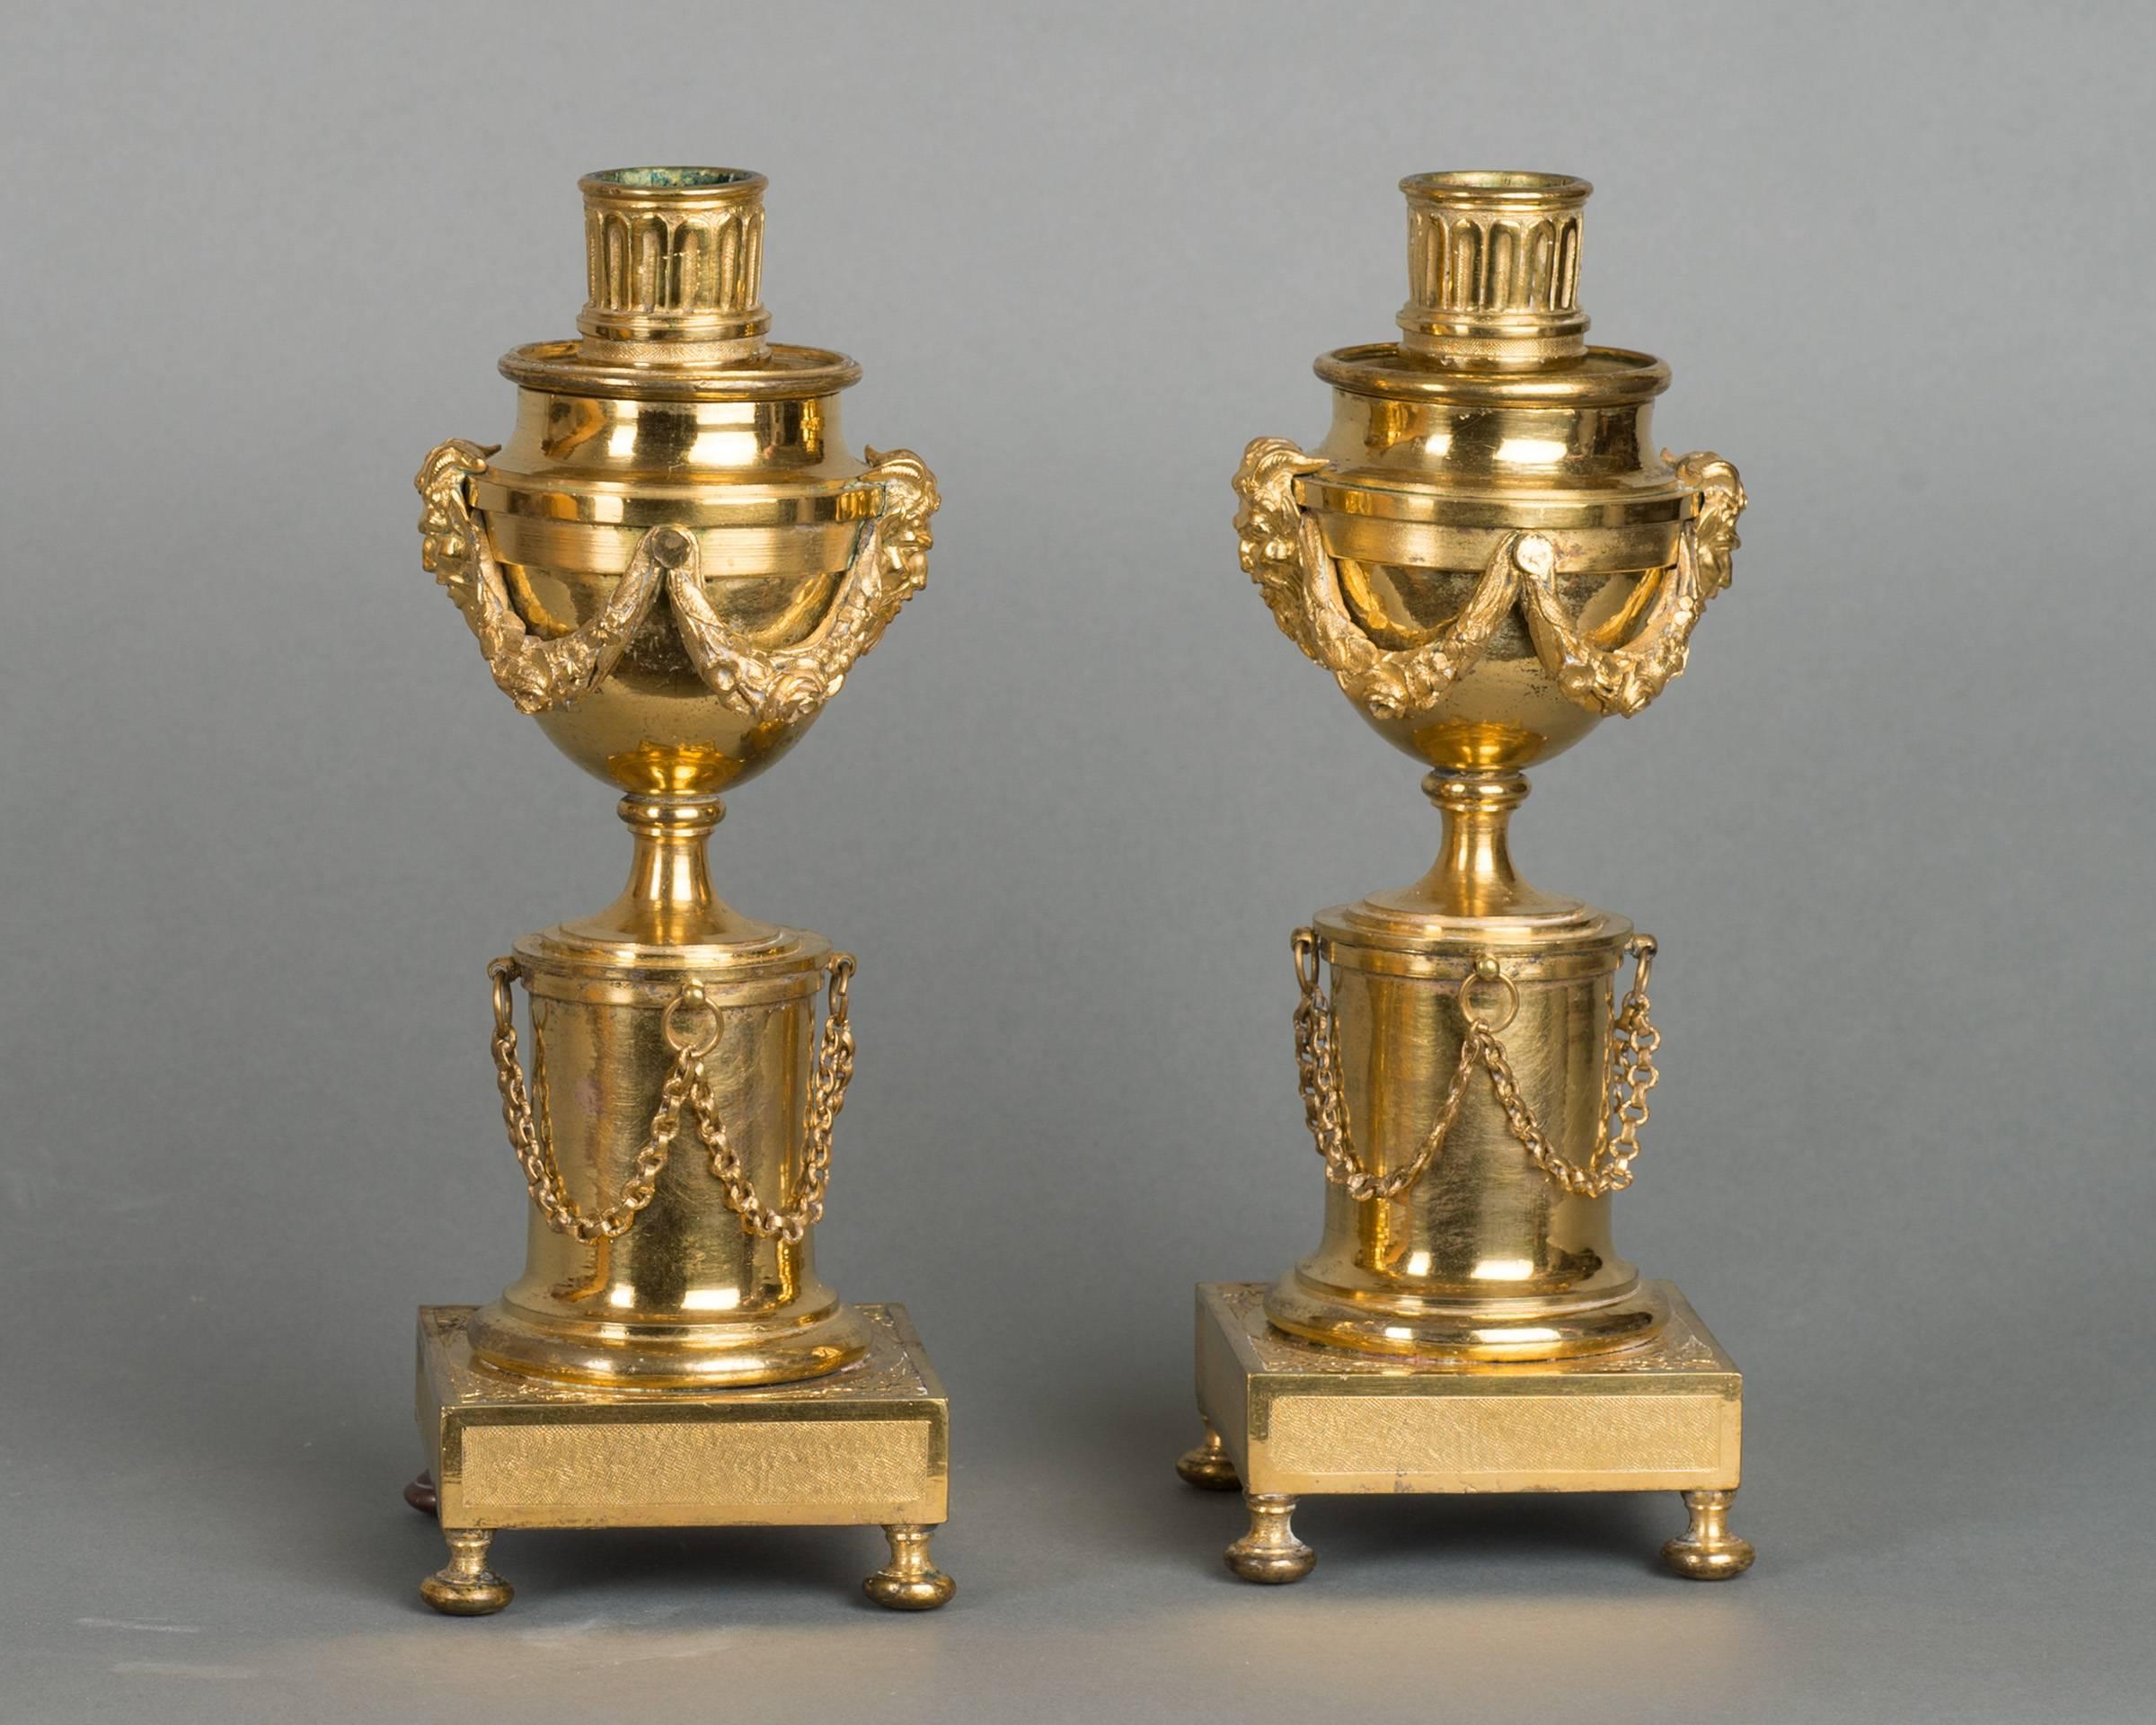 A very high quality so called candlesticks 